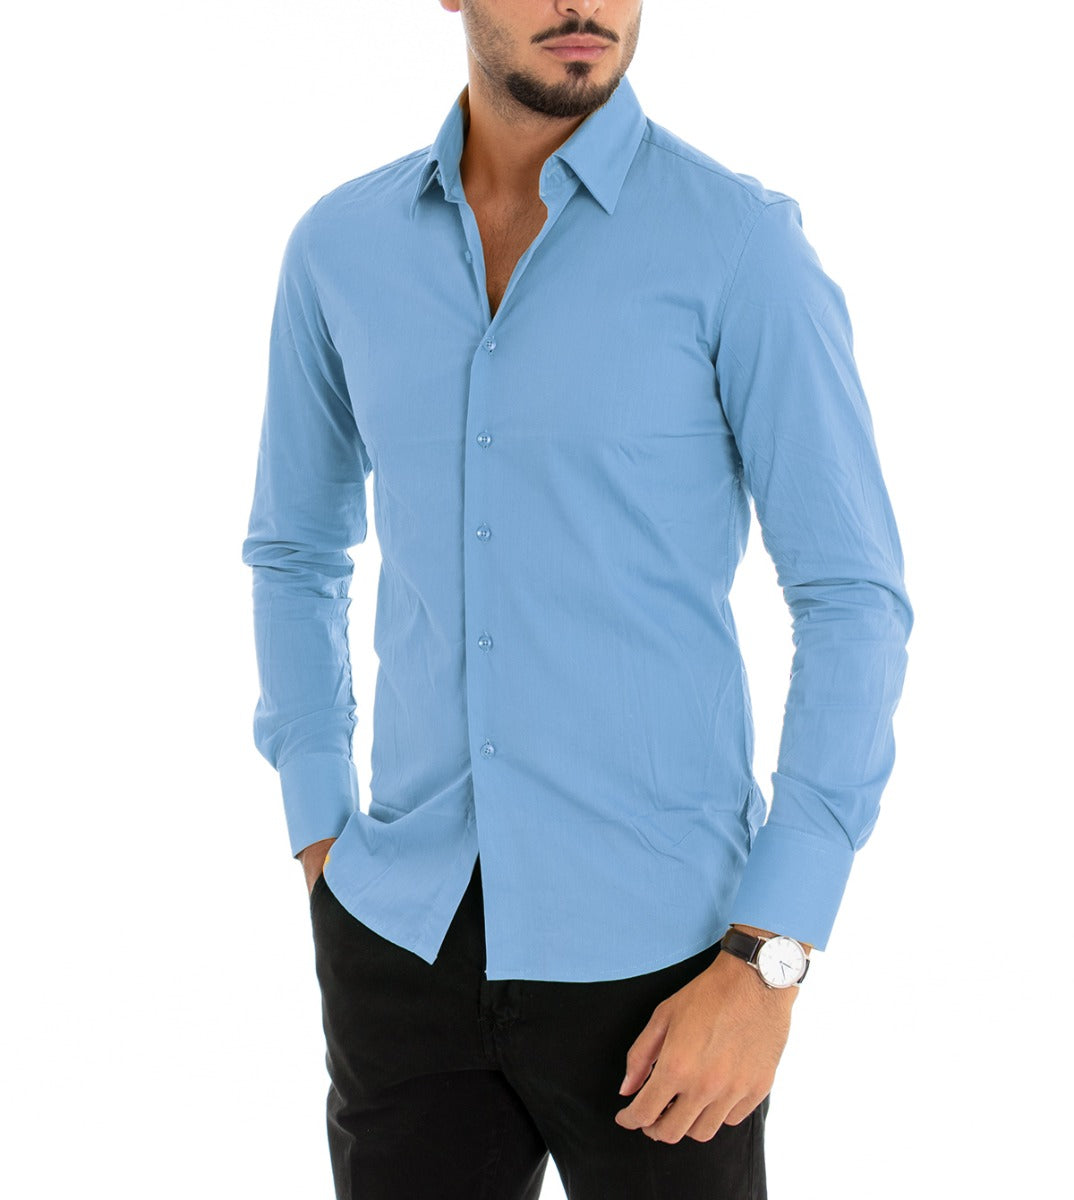 Men's Shirt With Collar Long Sleeve Slim Fit Basic Casual Cotton Light Blue GIOSAL-C1812A